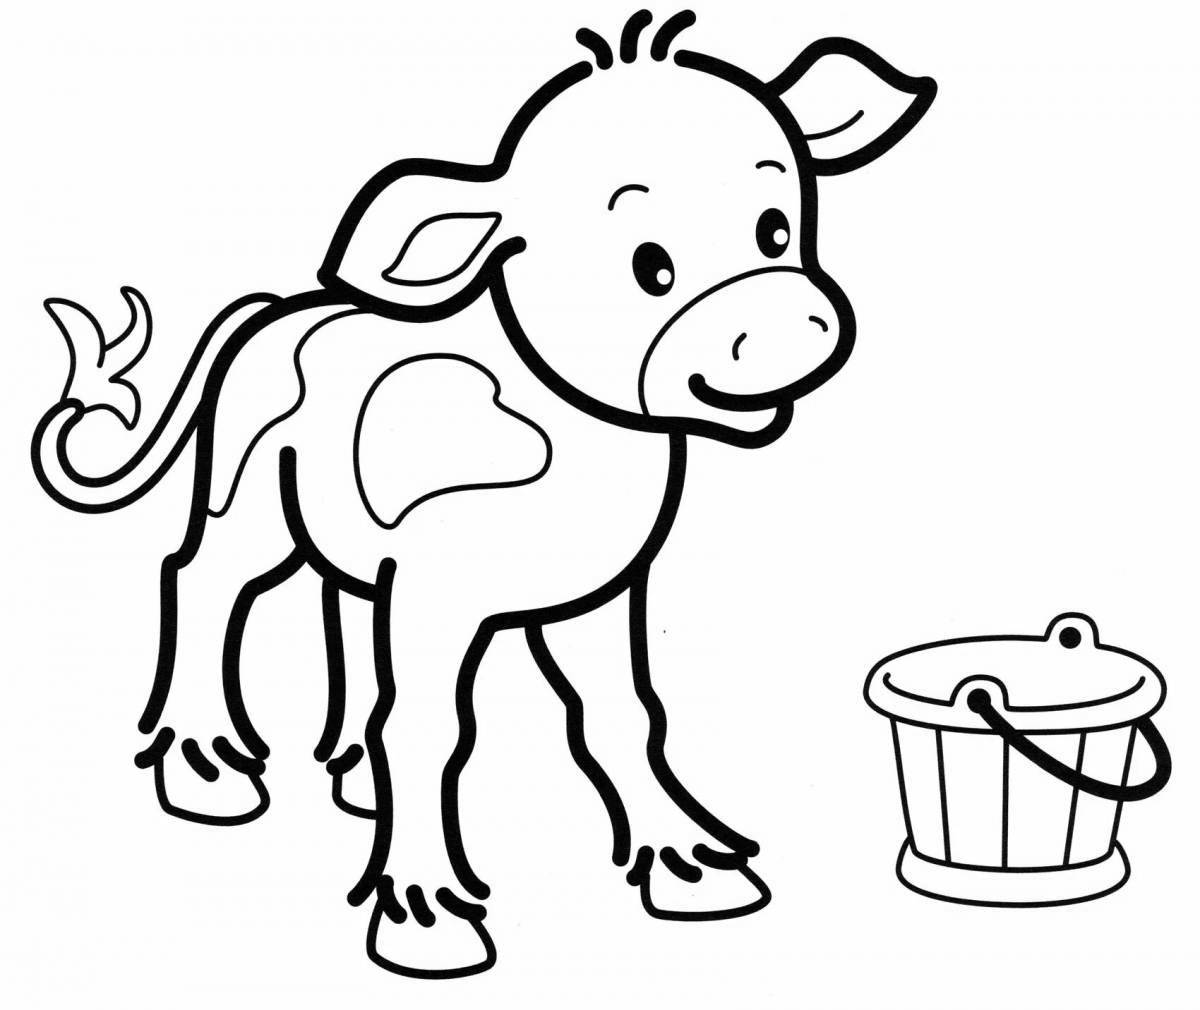 Coloring page playful cow and calf